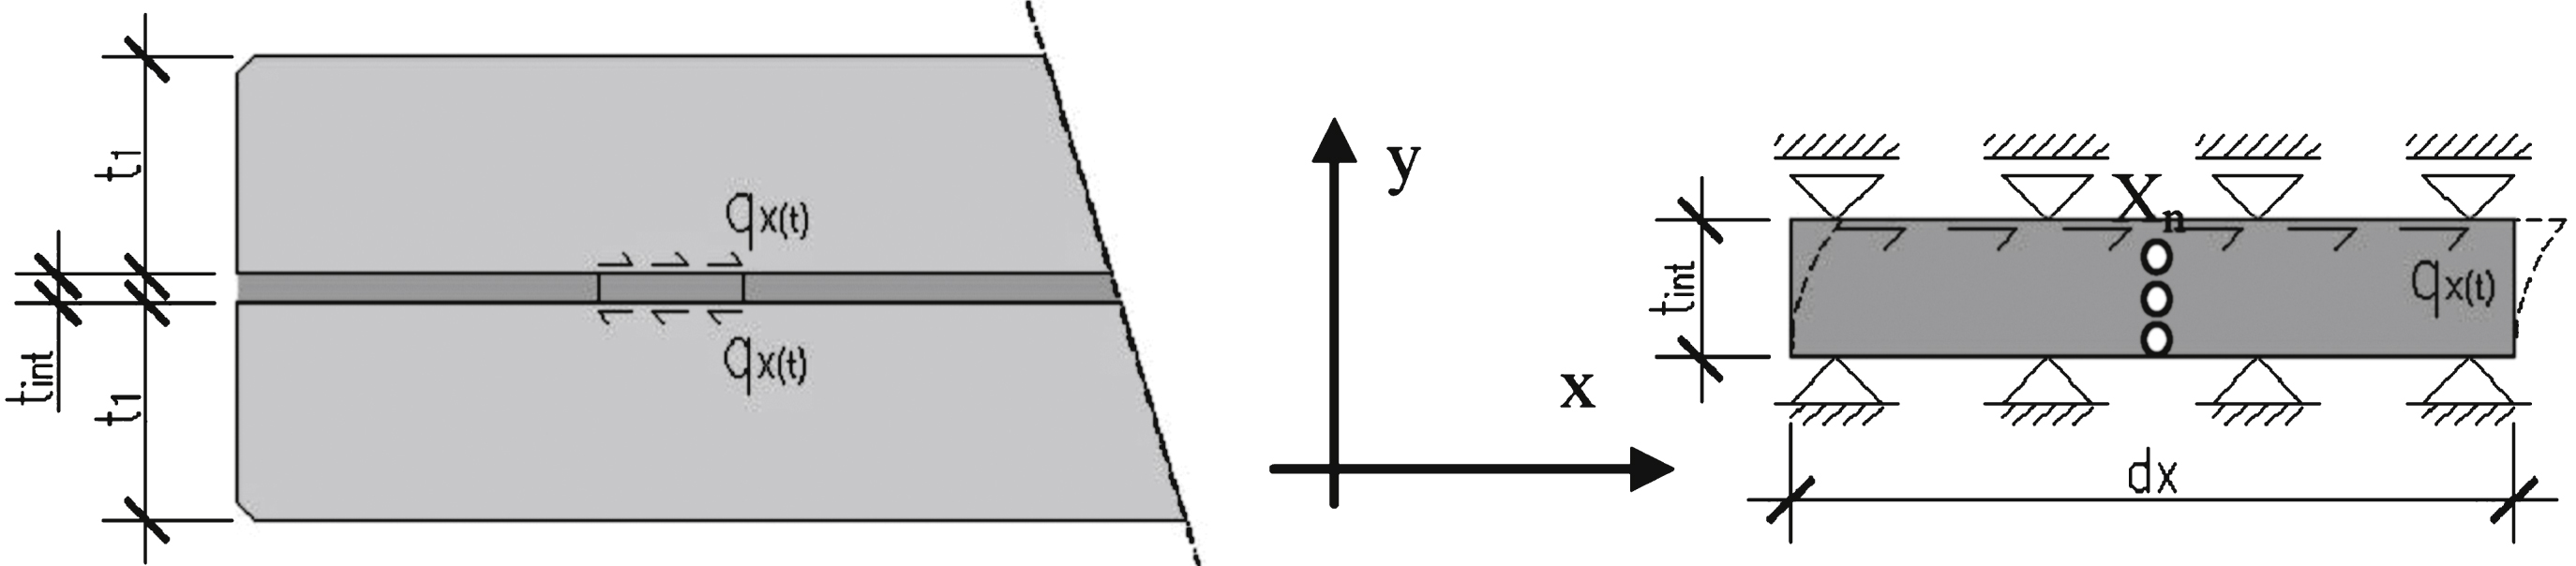 Numerical experiment, definition, viscoelastic element subjected to time dependent shear.